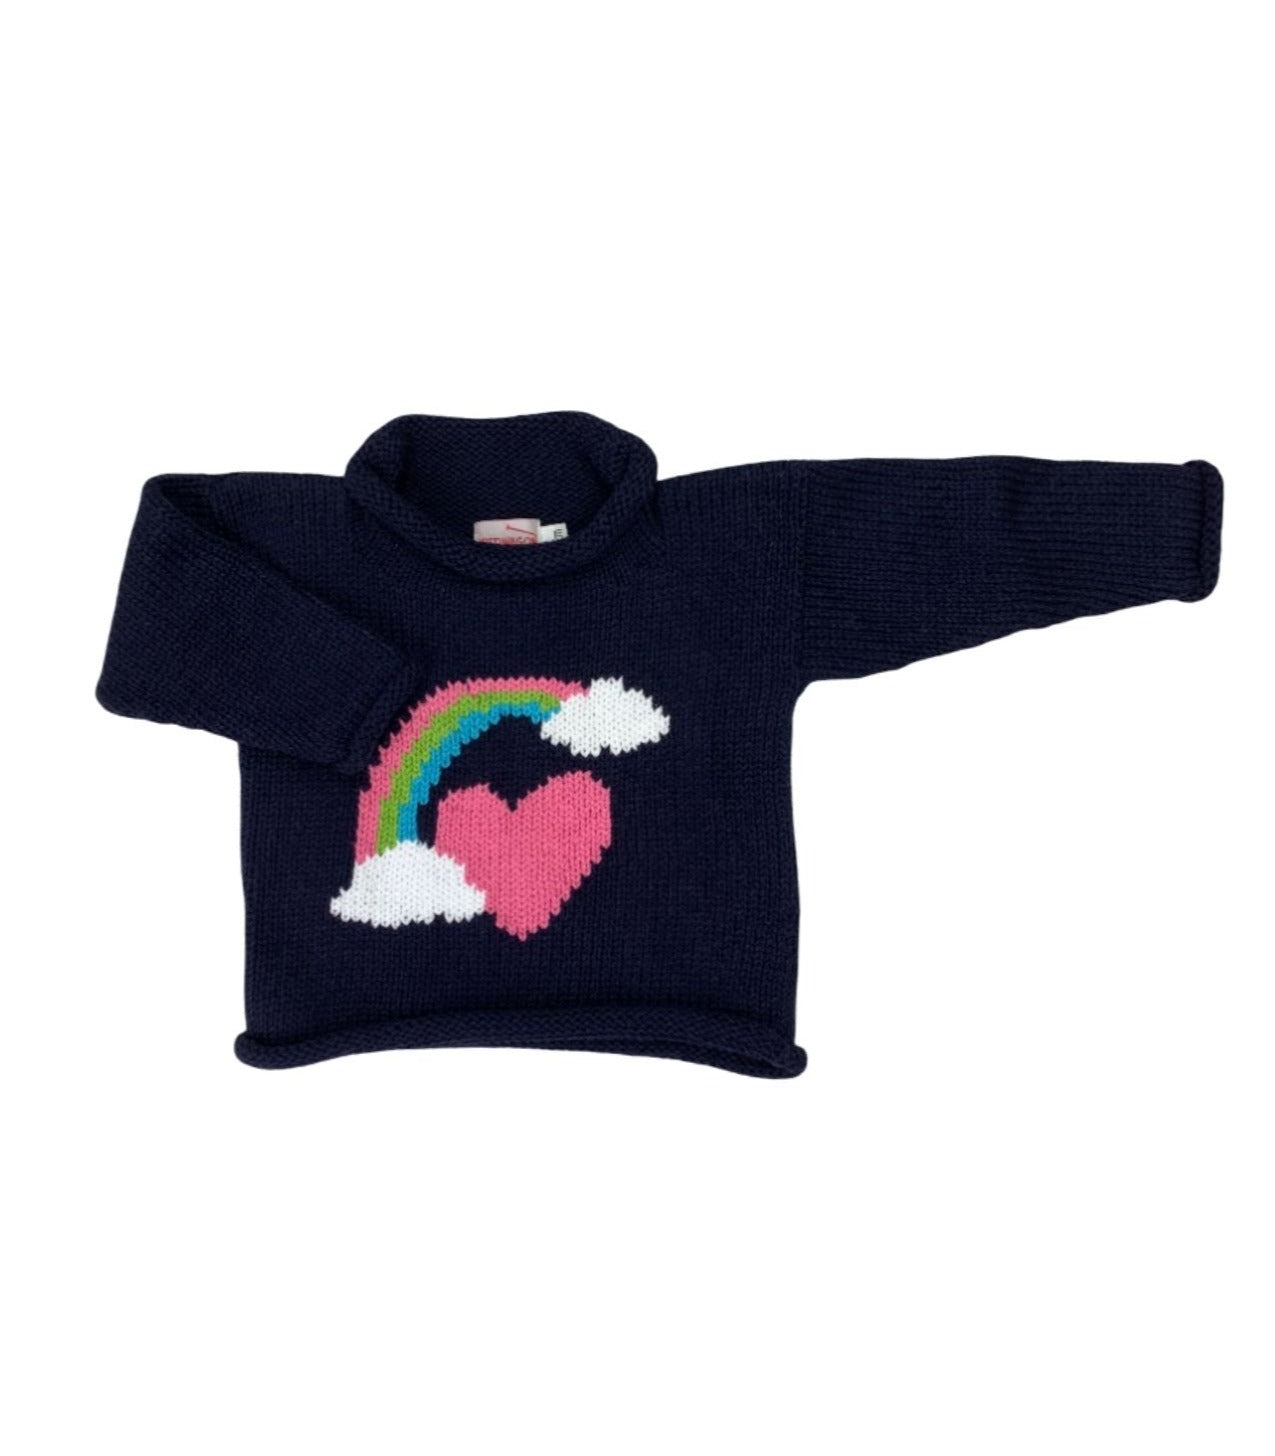 long sleeve navy sweater with a pink, green and blue rainbow and two white clouds, in the center there is a pink heart